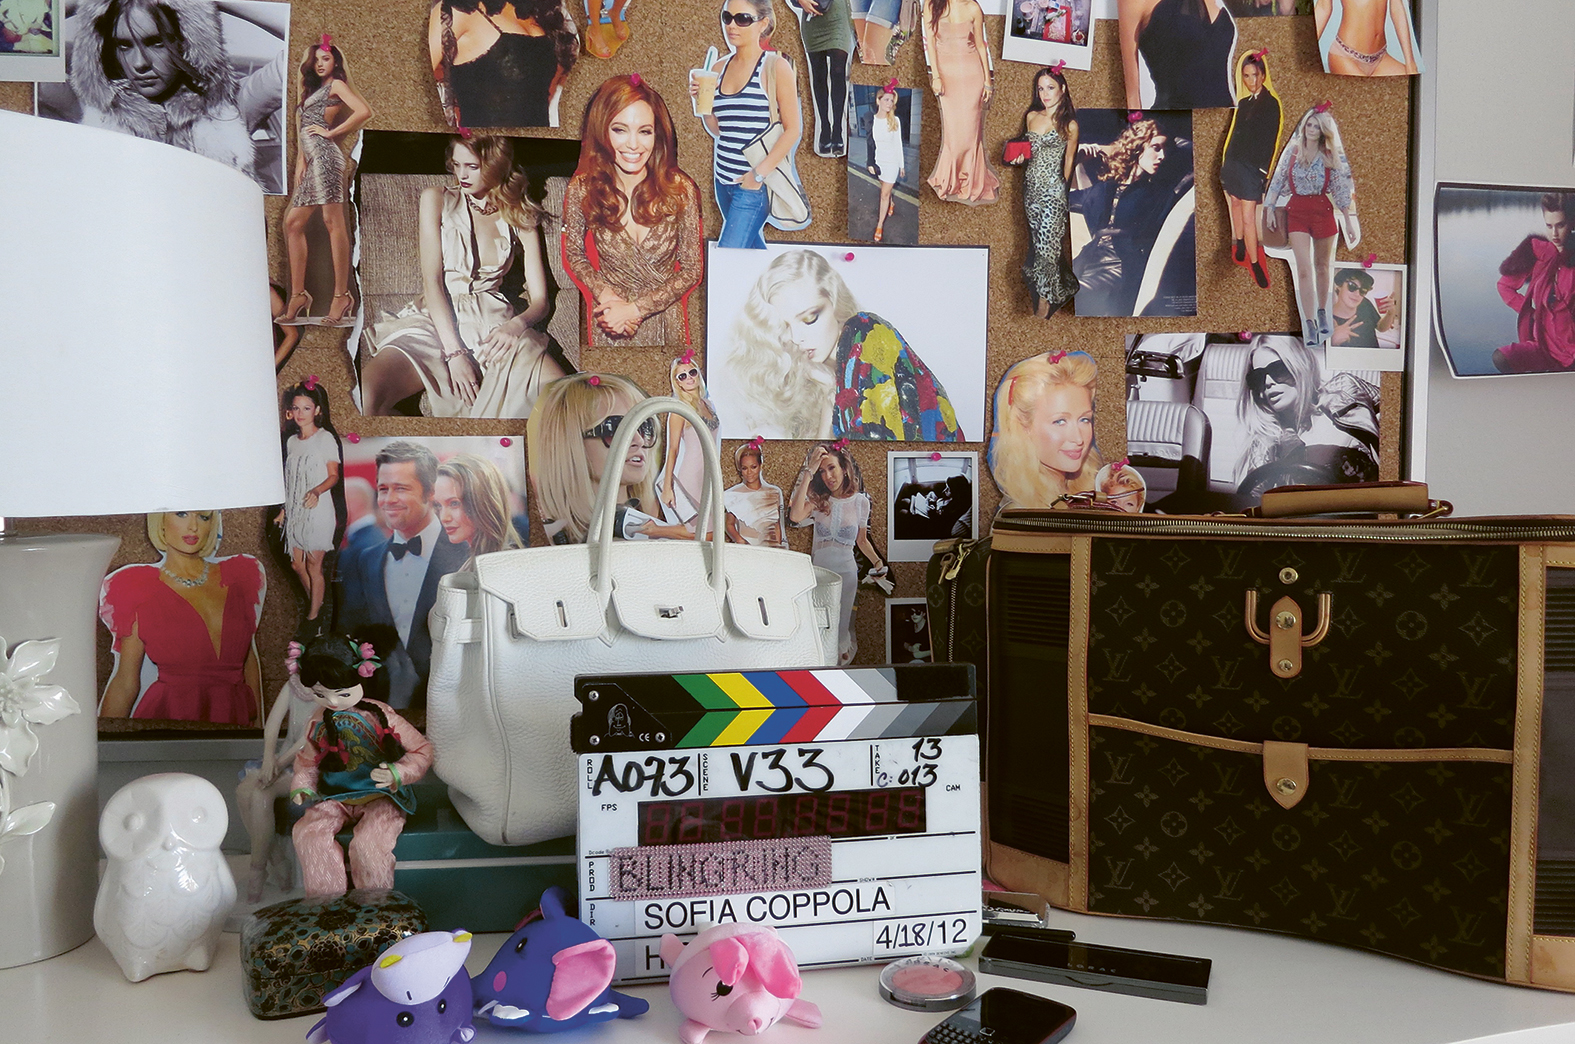 poster advertising Louis Vuitton with Sofia Coppola in paper